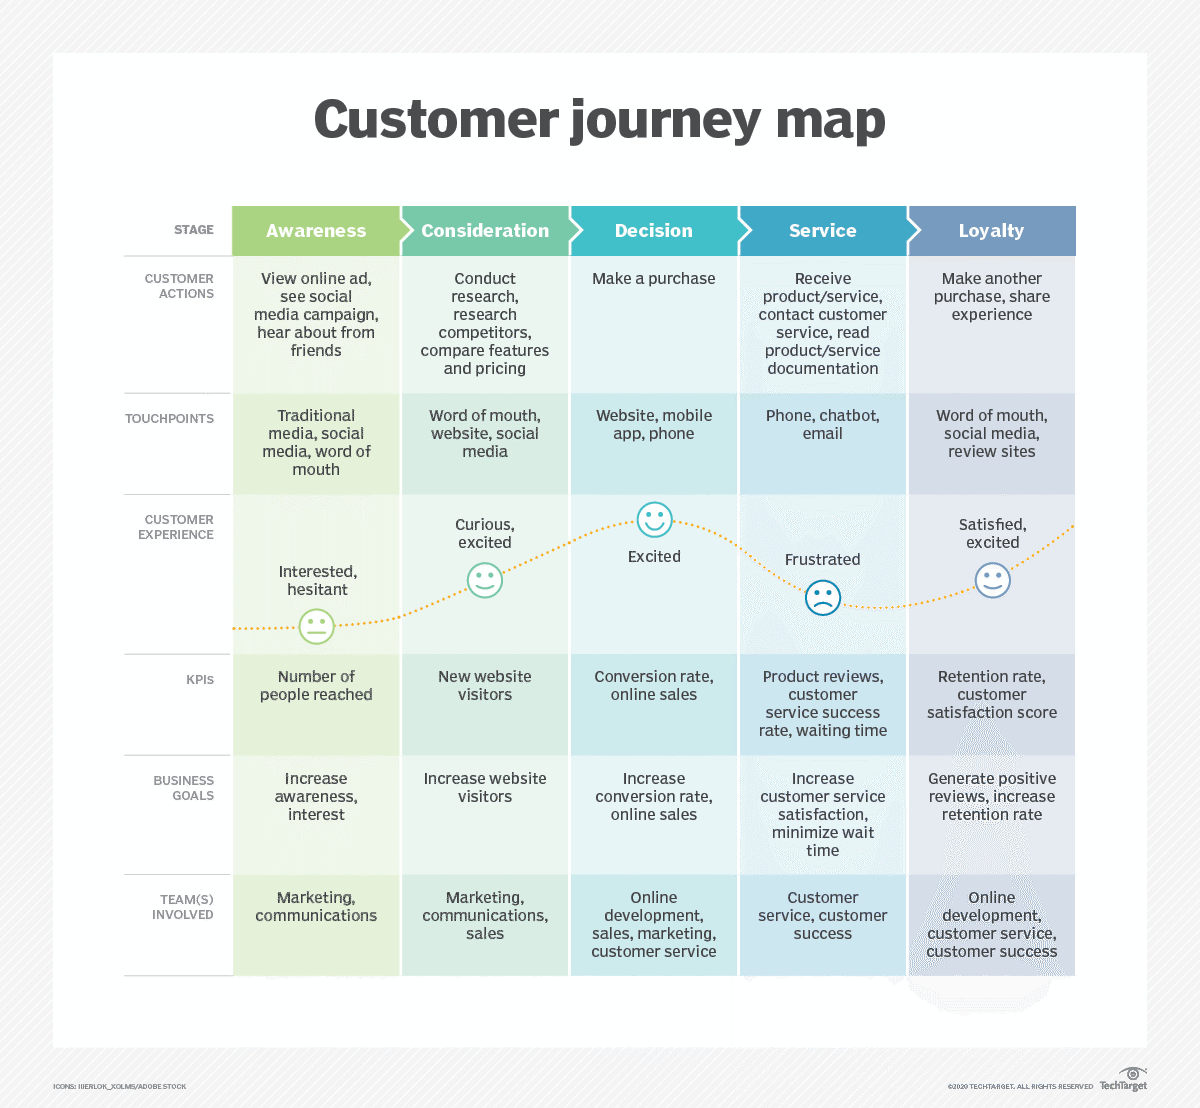 Tech targets example of a customer journey map for the buying process broken down into 5 stages: Awareness, Consideration, Decision, Service, Loyalty.